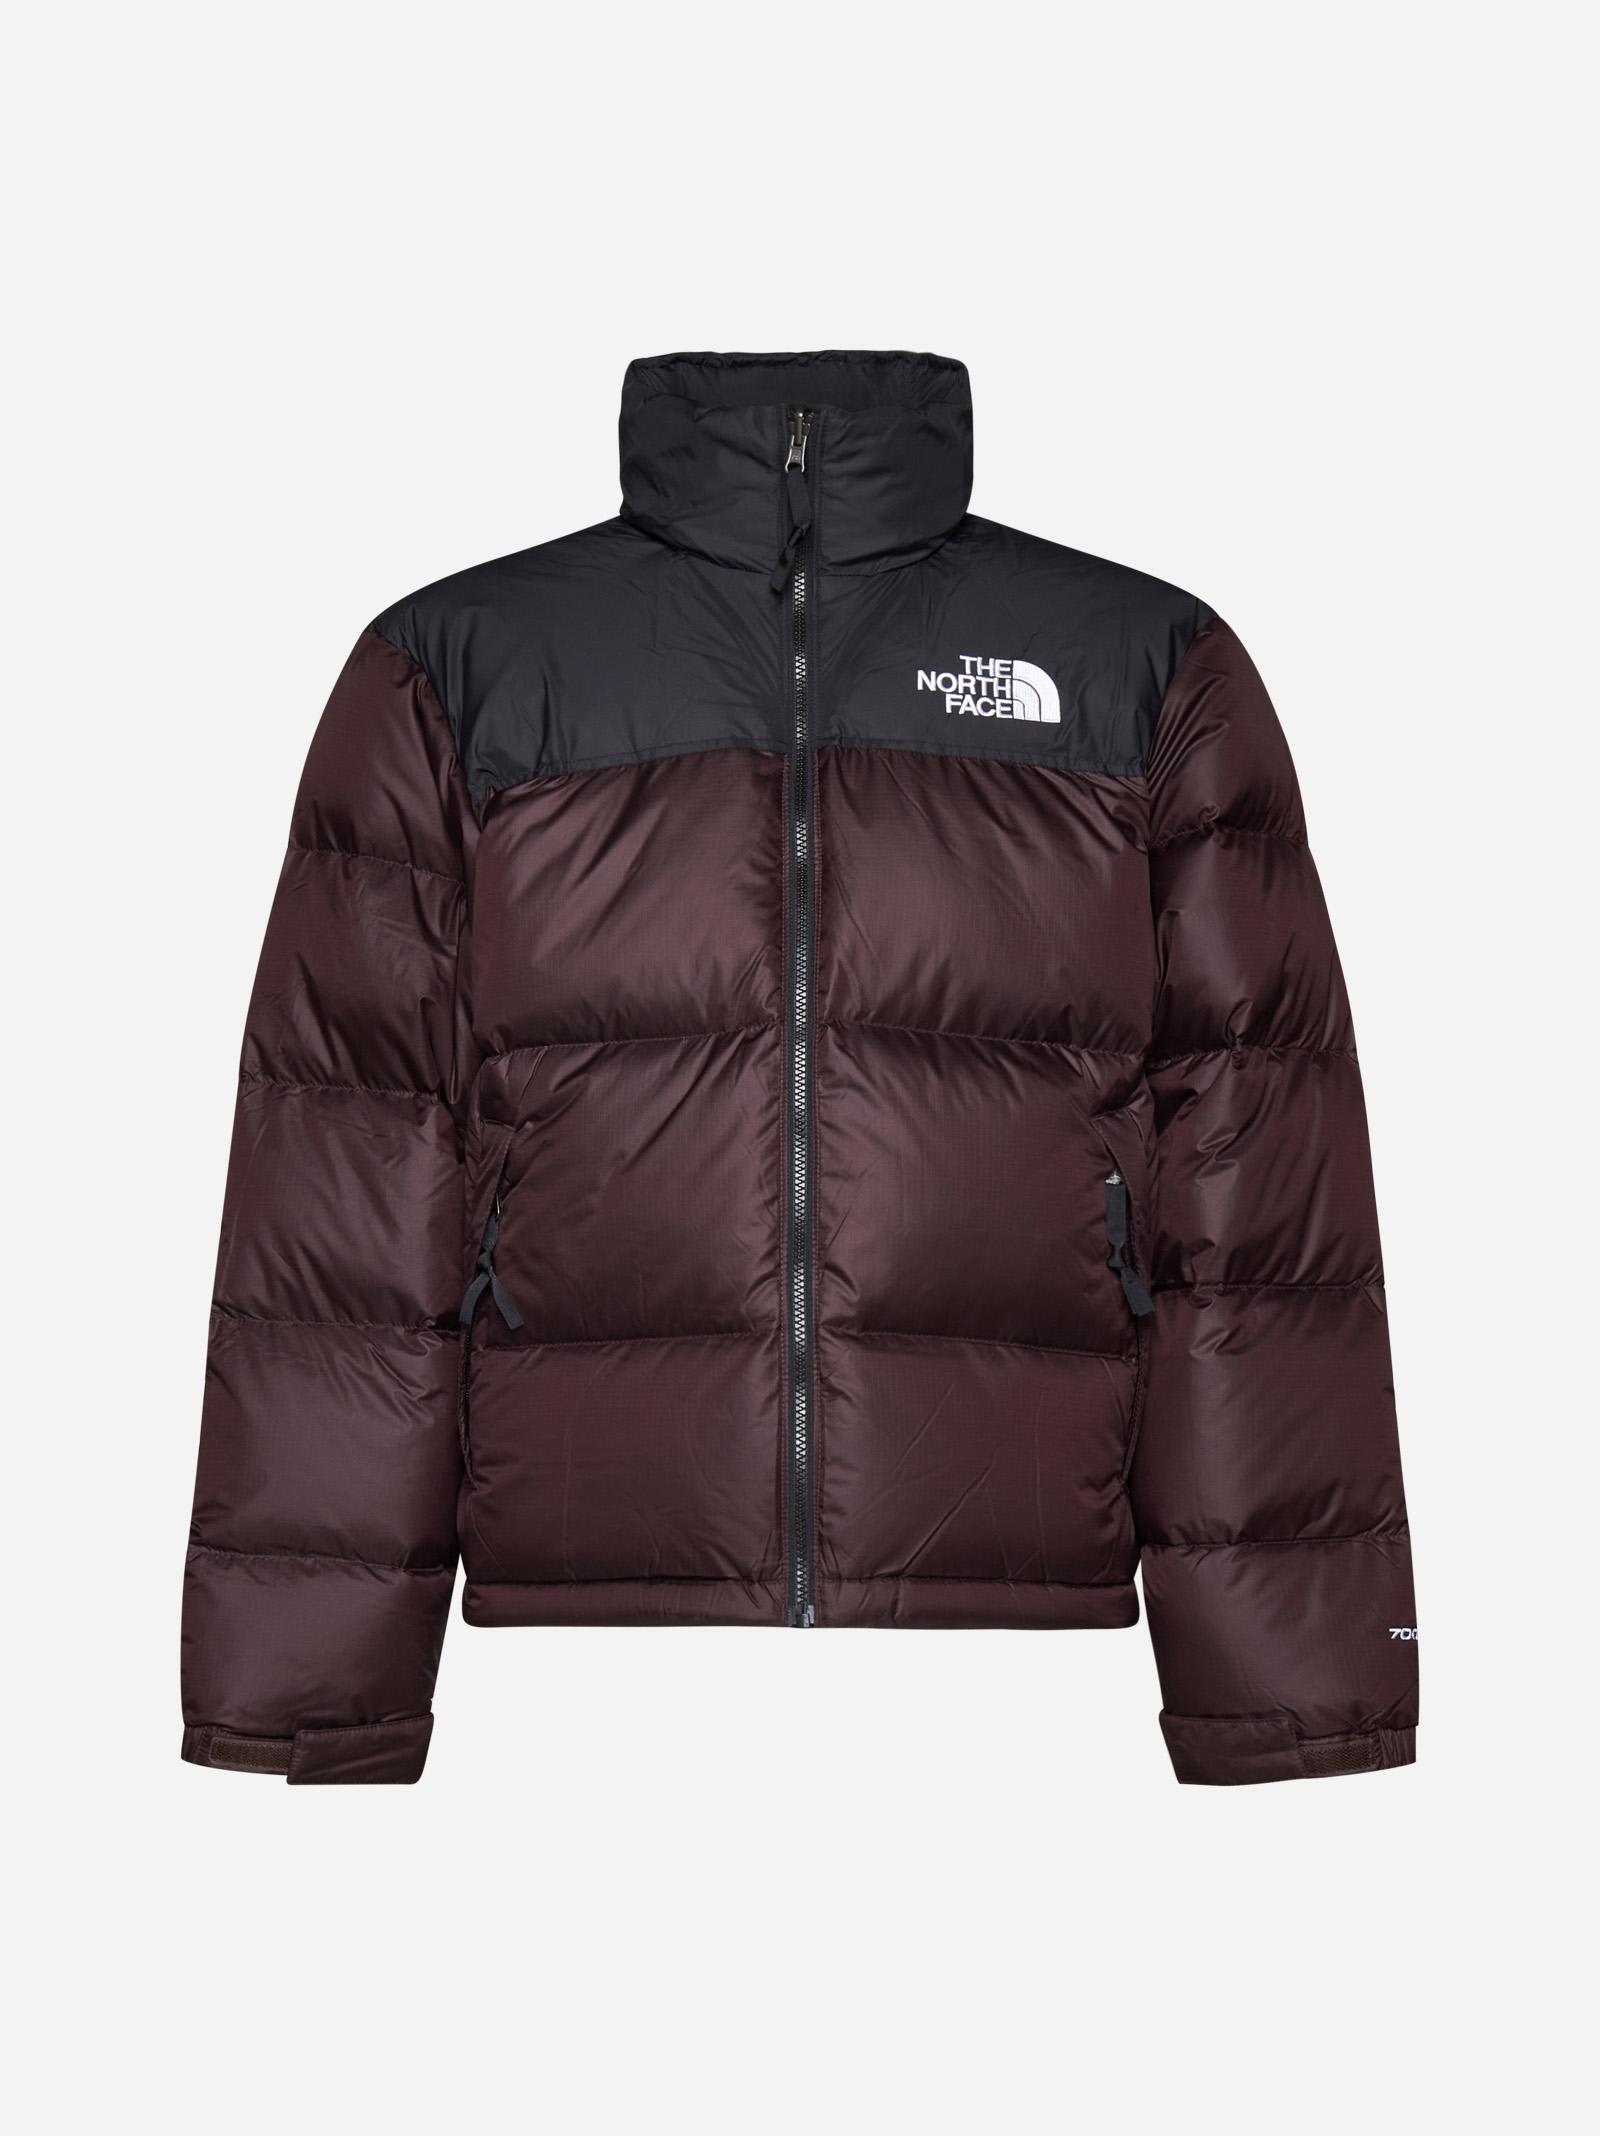 The North Face 1996 Retro Nuptse Quilted Nylon Down Jacket | Smart Closet